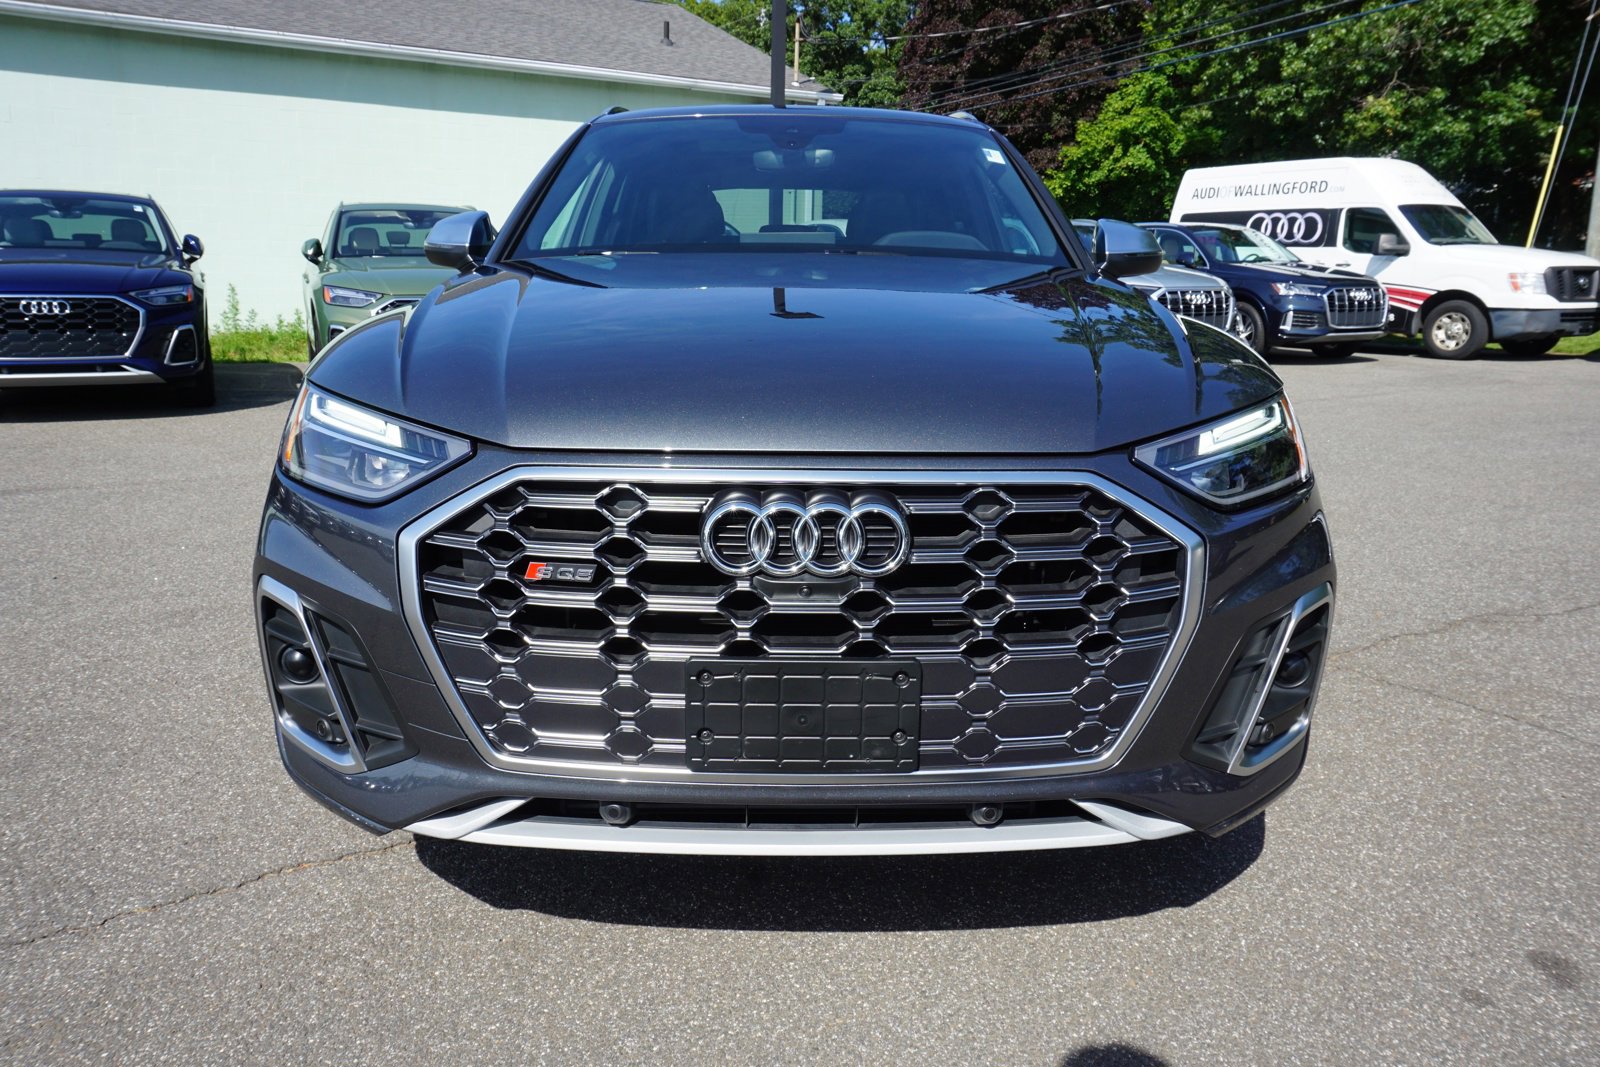 Certified 2021 Audi SQ5 Premium Plus with VIN WA1B4AFY3M2025222 for sale in Wallingford, CT